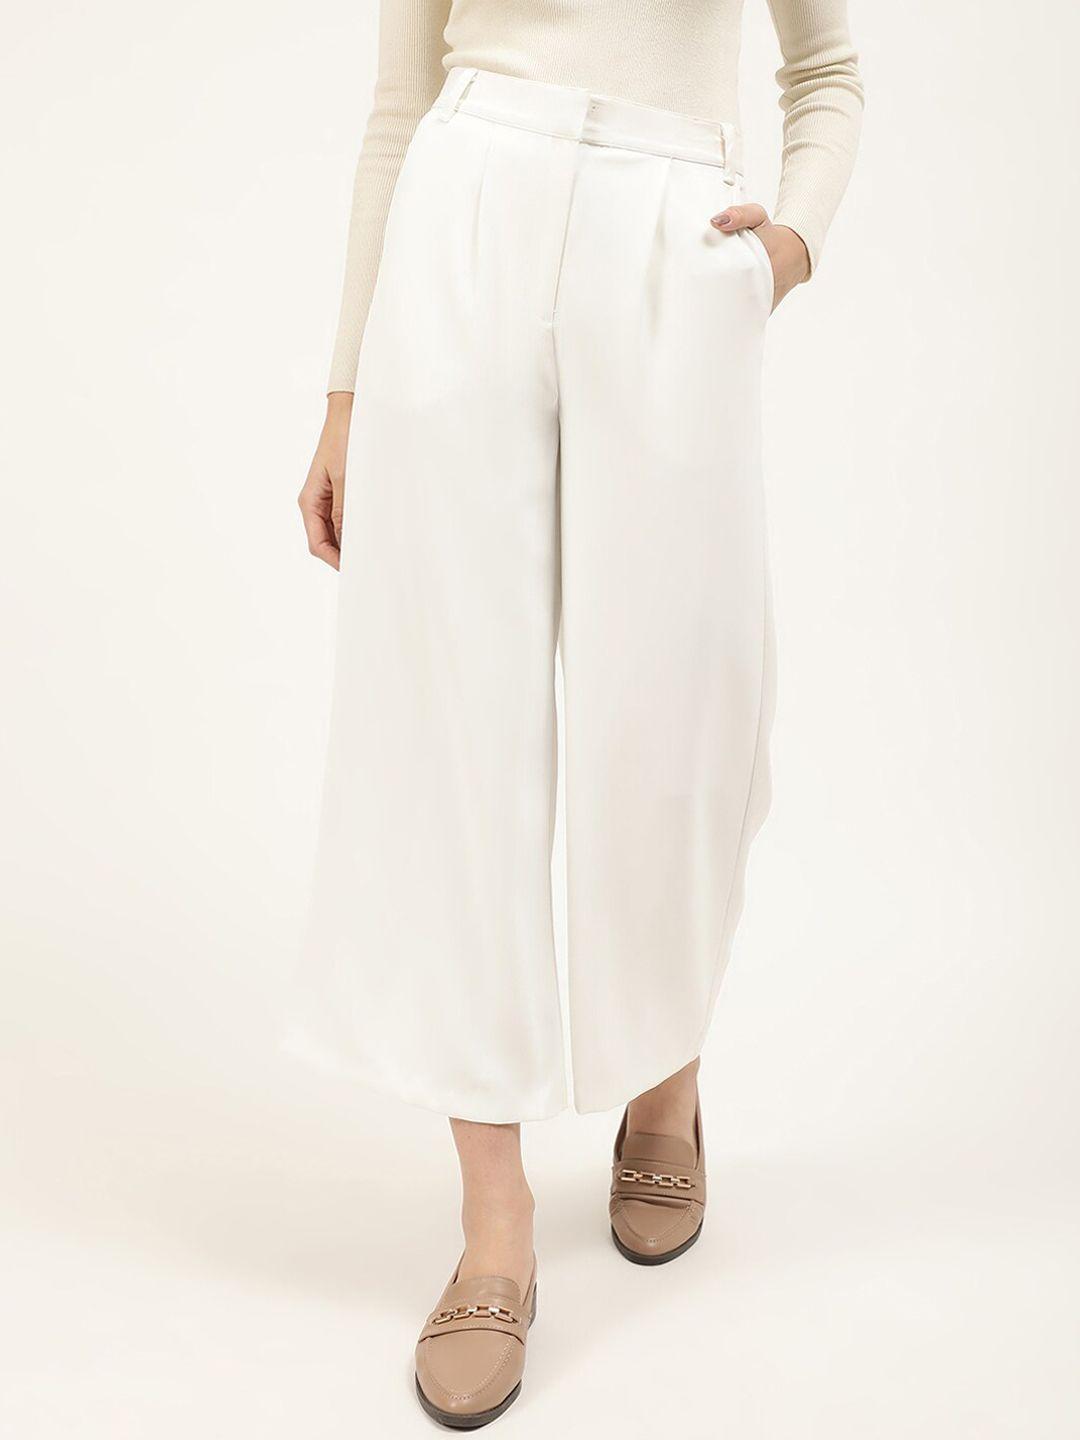 centrestage women white straight fit pleated culottes trousers